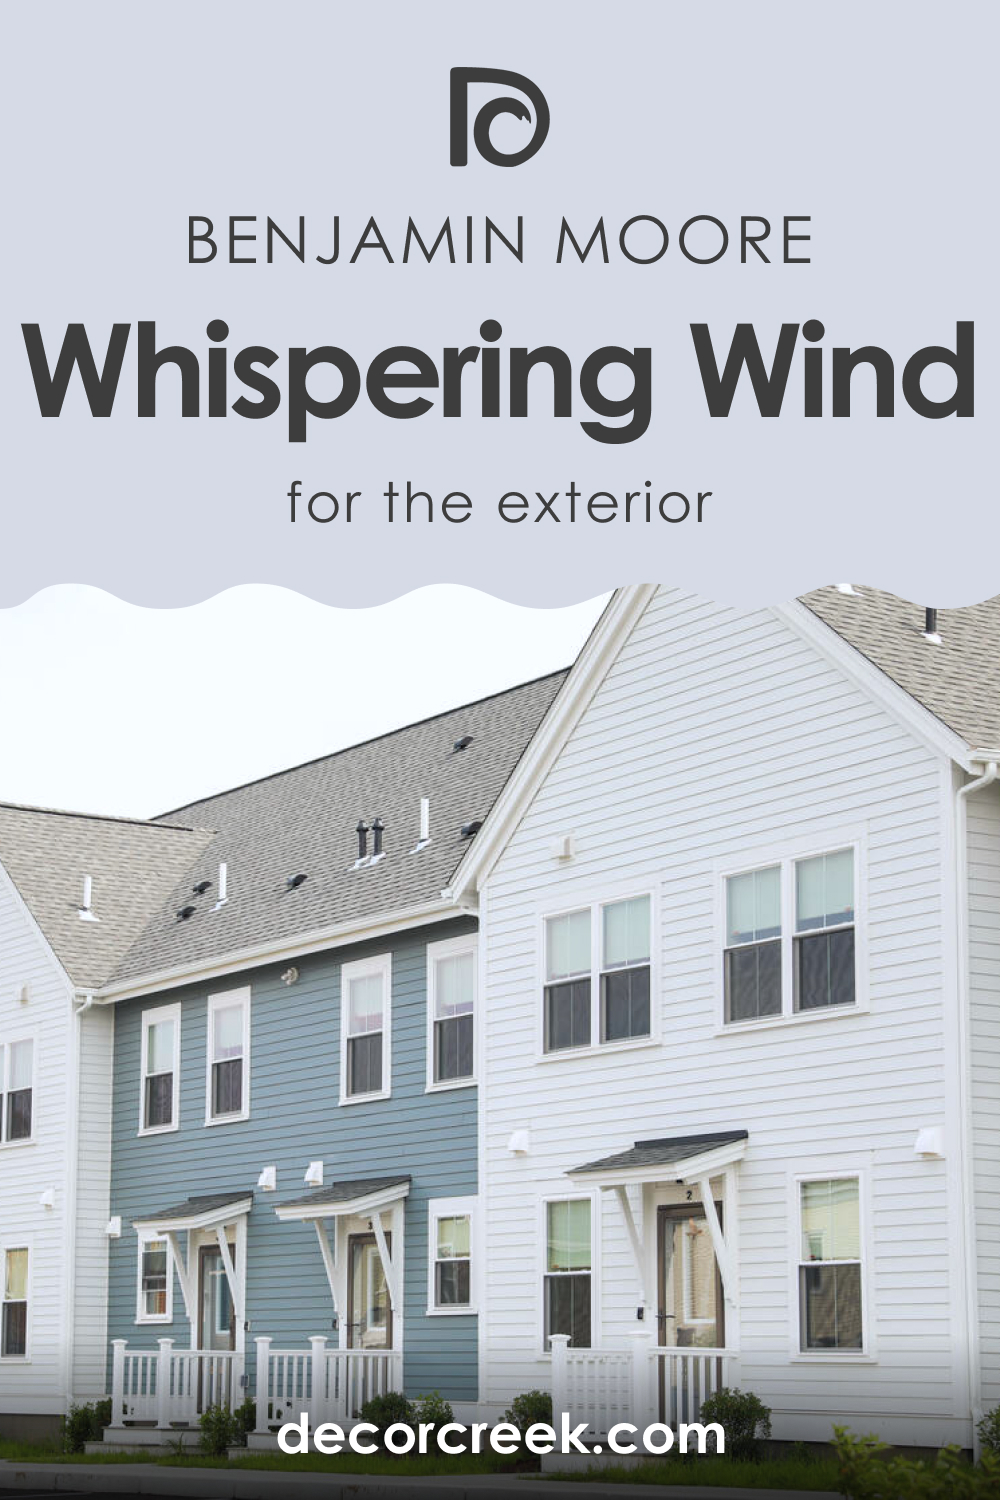 Whispering Wind 1416 for an Exterior